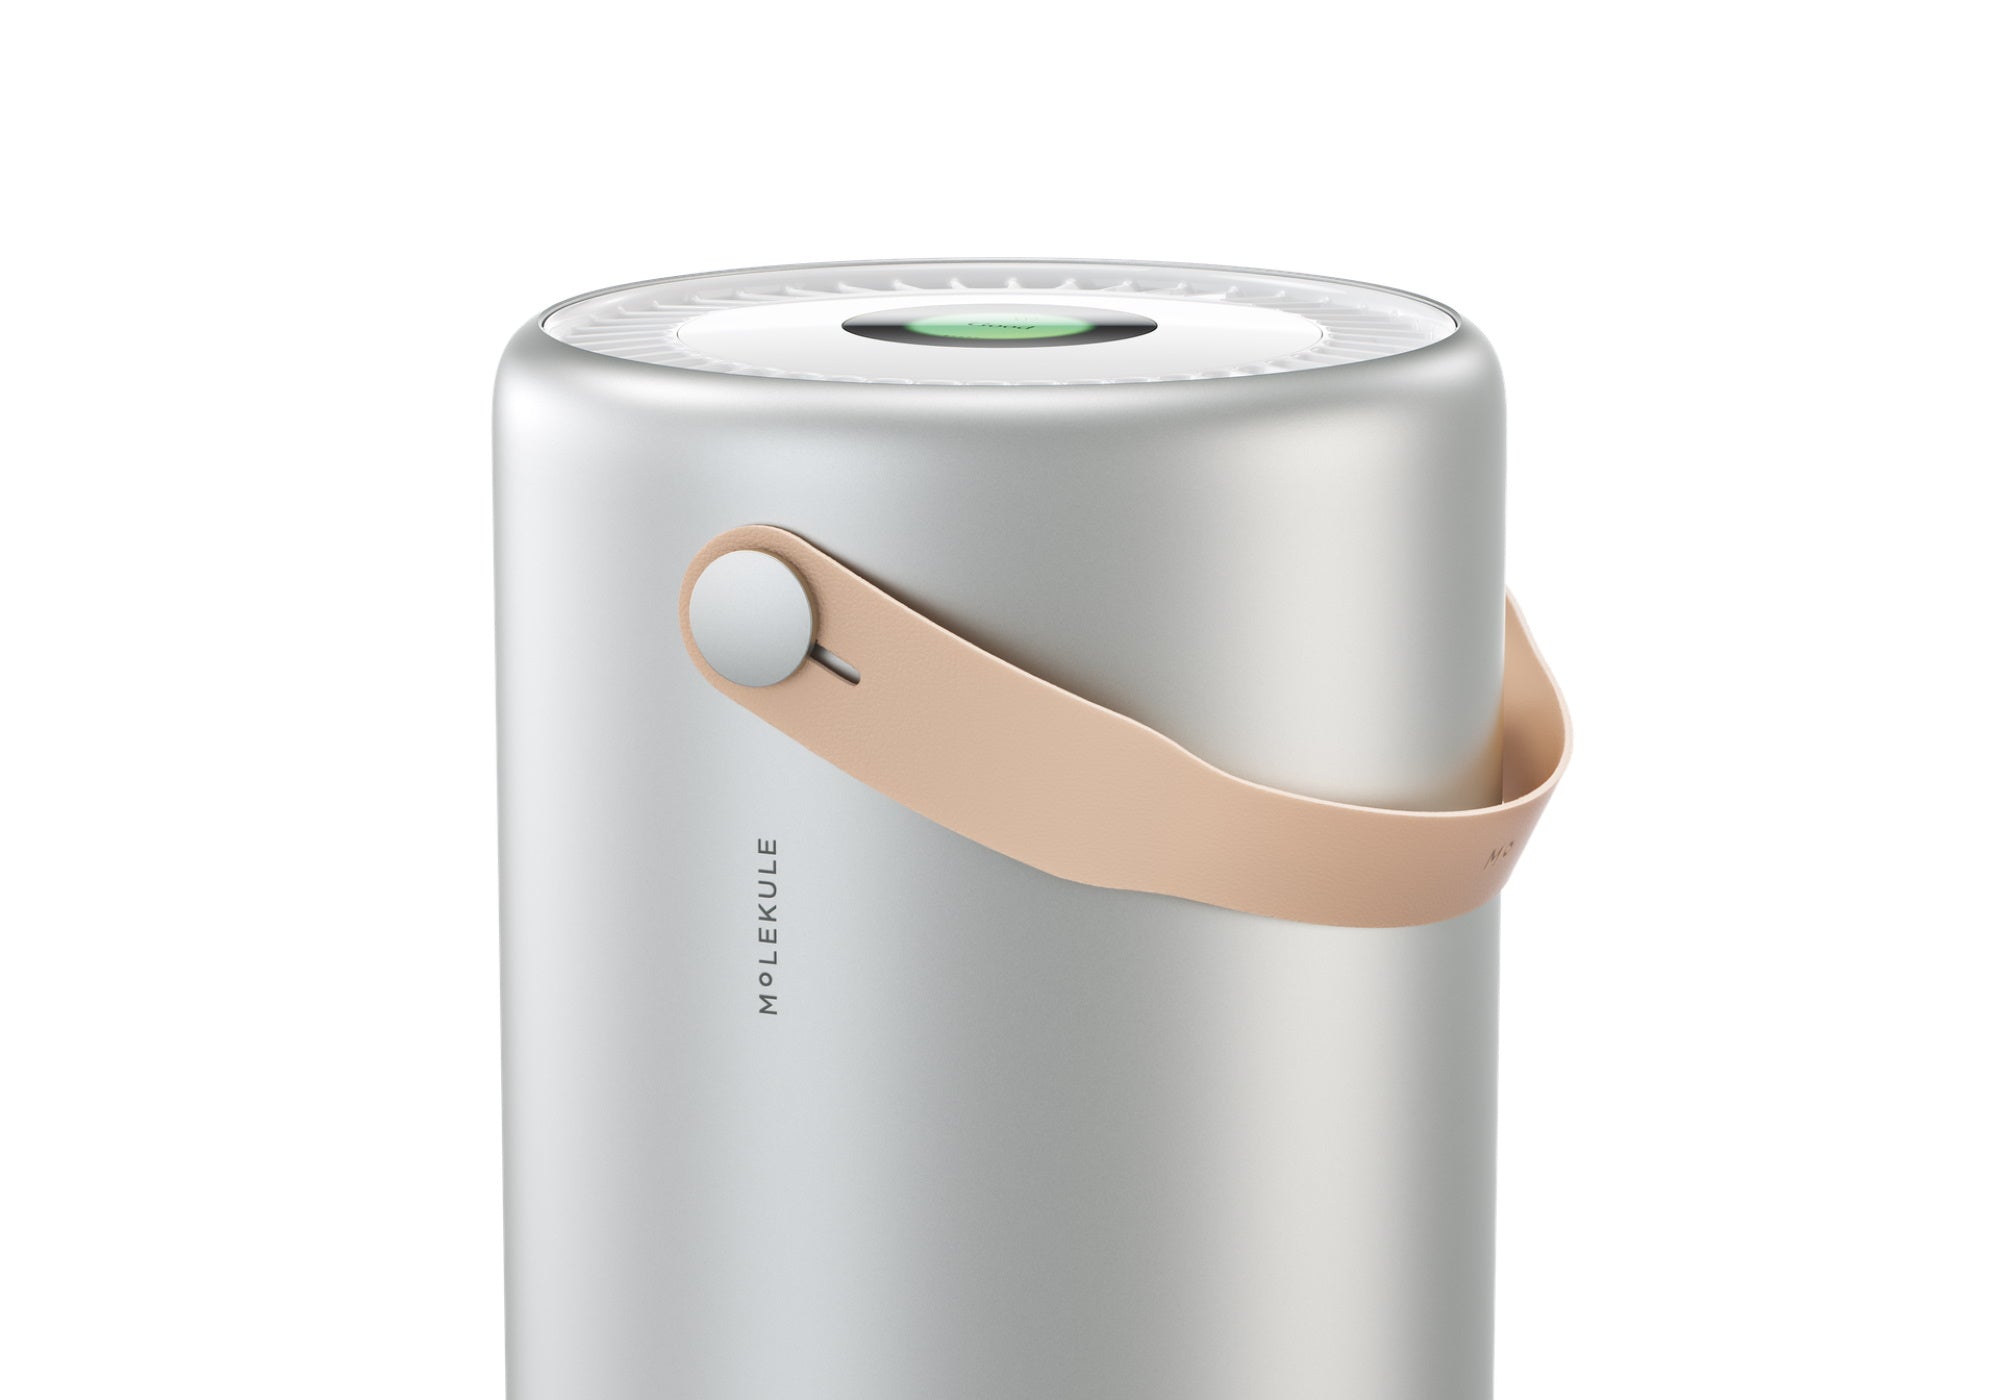 Molekule Air Pro air purifier on white background